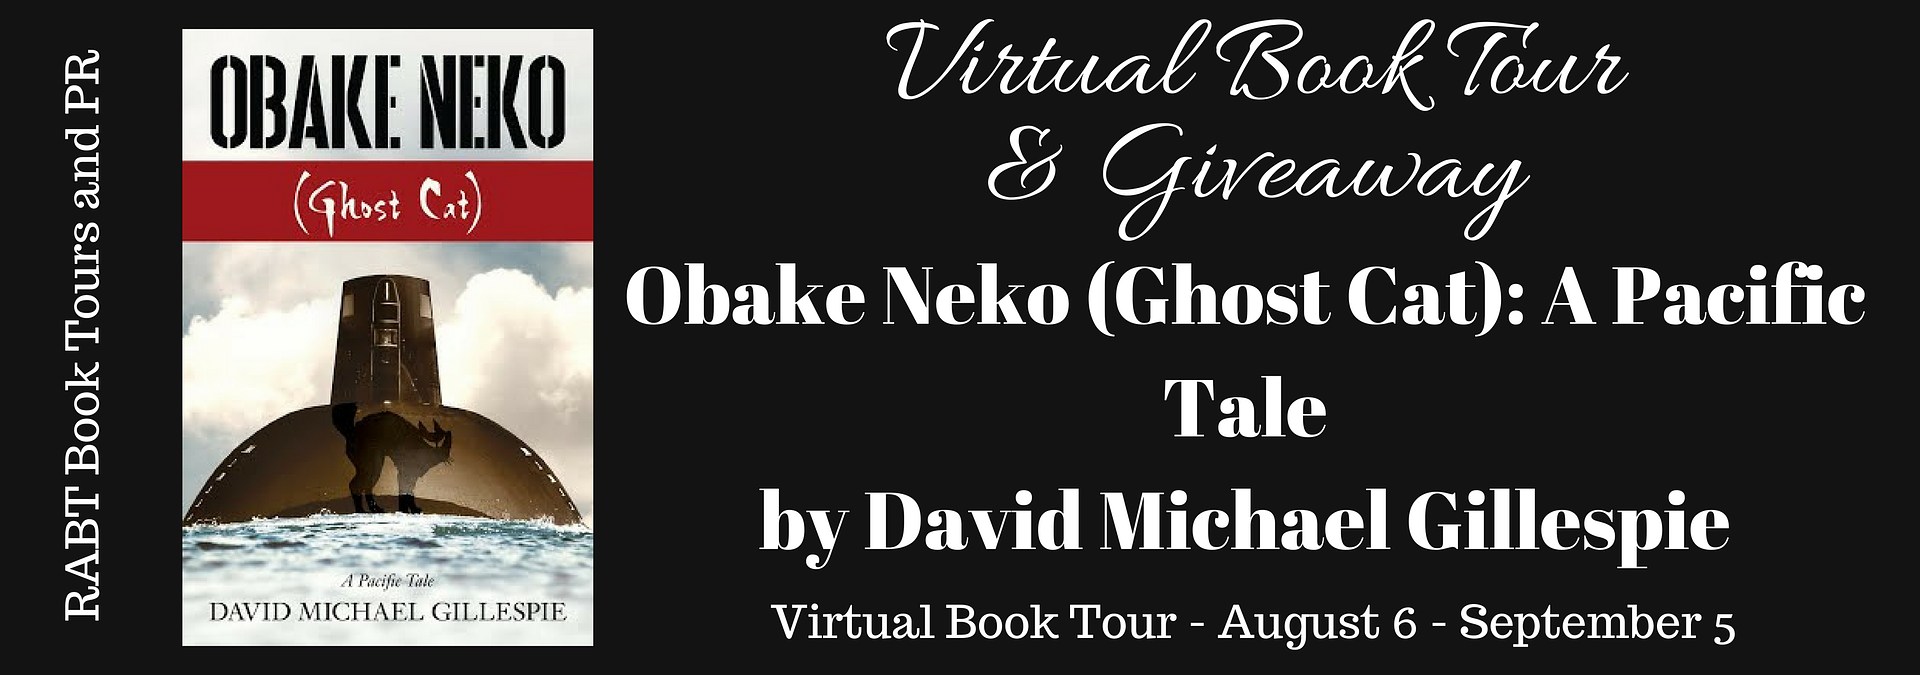 Virtual Book Tour: Obake Neko (Ghost Cat) by David Michael Gillespie #interview #giveaway #mystery #historical 